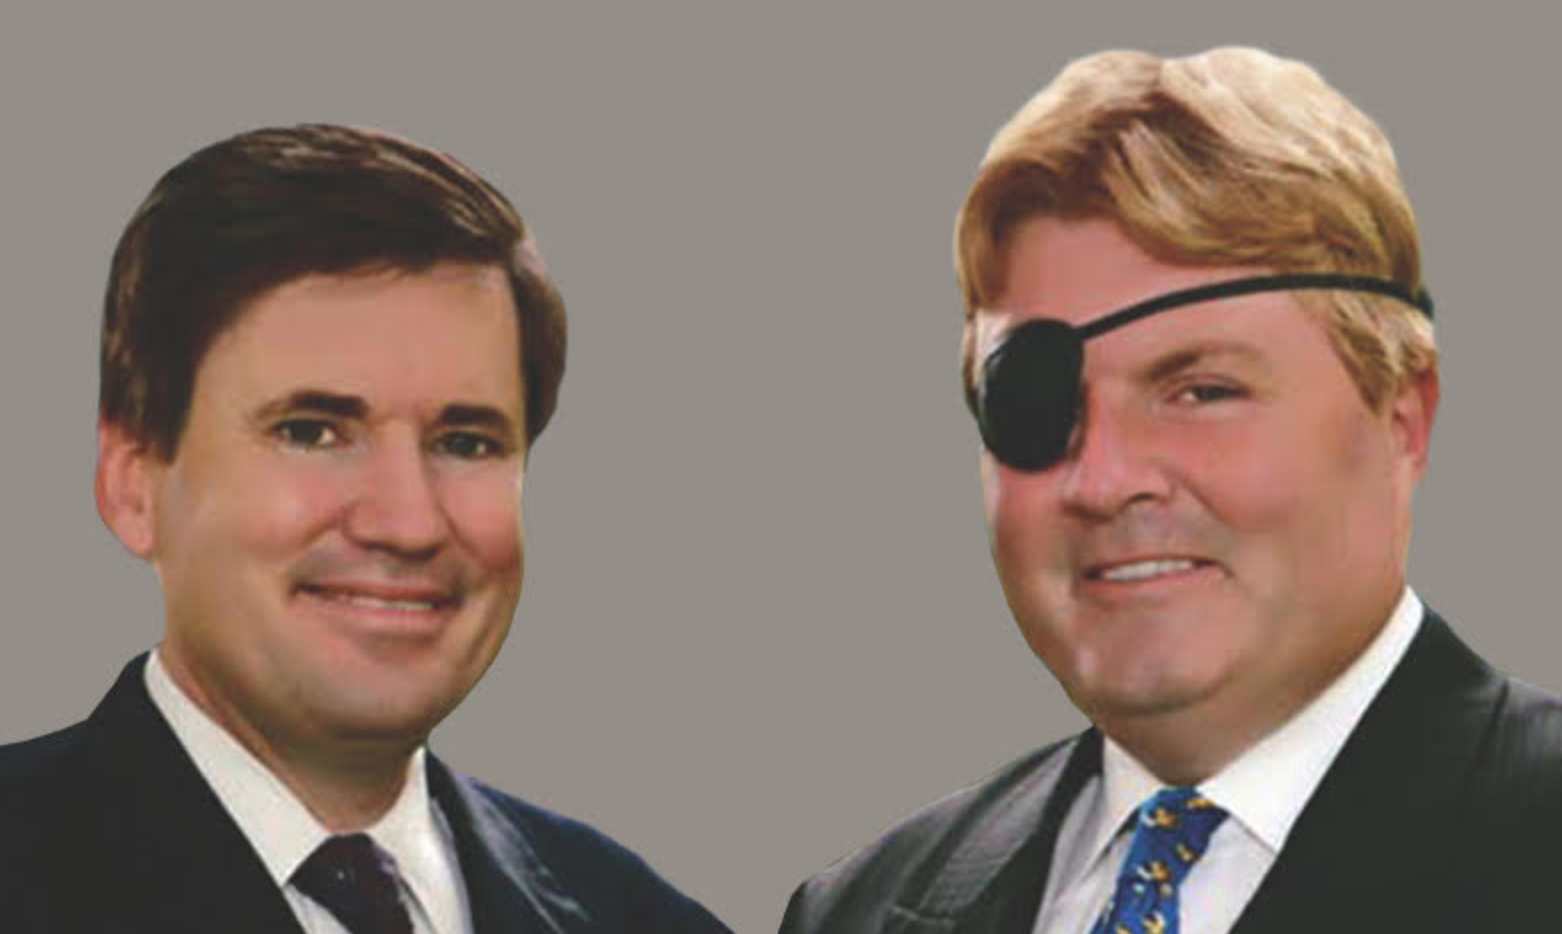 Why does the Brown And Brown Lawyer Wear An Eye Patch
